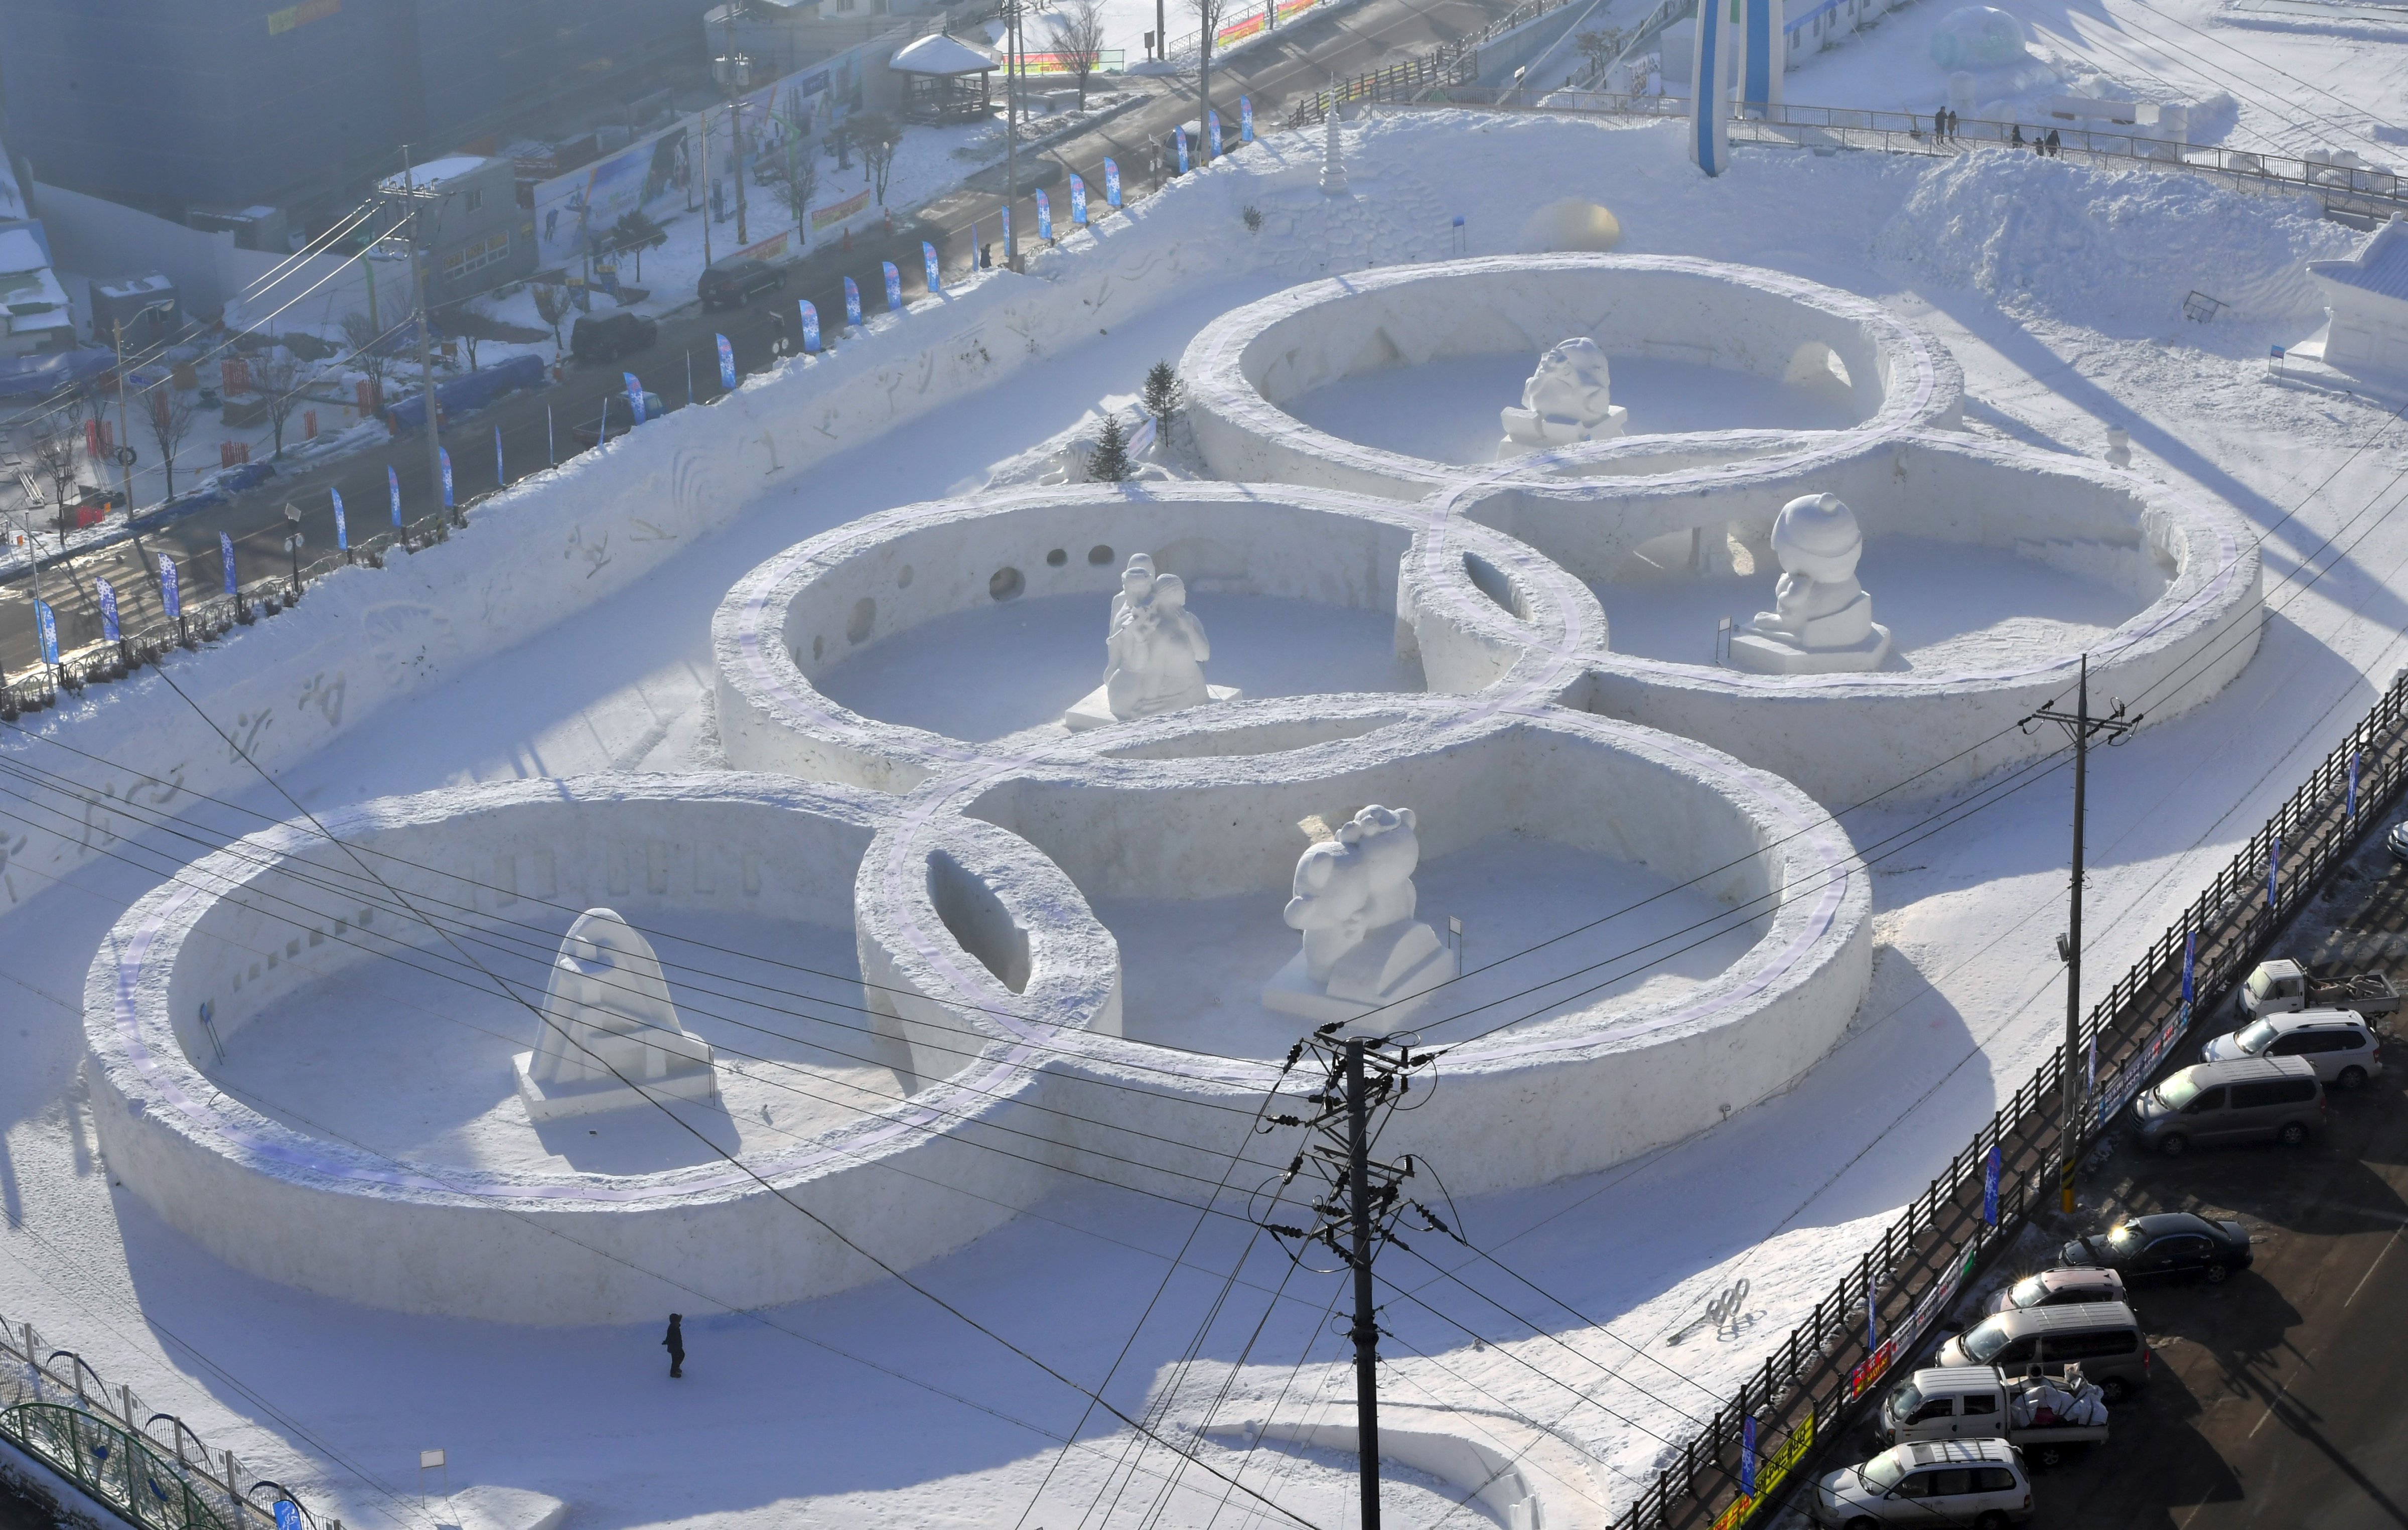 This photo taken Feb. 4, 2017 shows a snow sculpture near the venue for the opening and closing ceremonies for the Pyeongchang 2018 Winter Olympic Games. (Jung Yeon-Je—AFP/Getty Images)